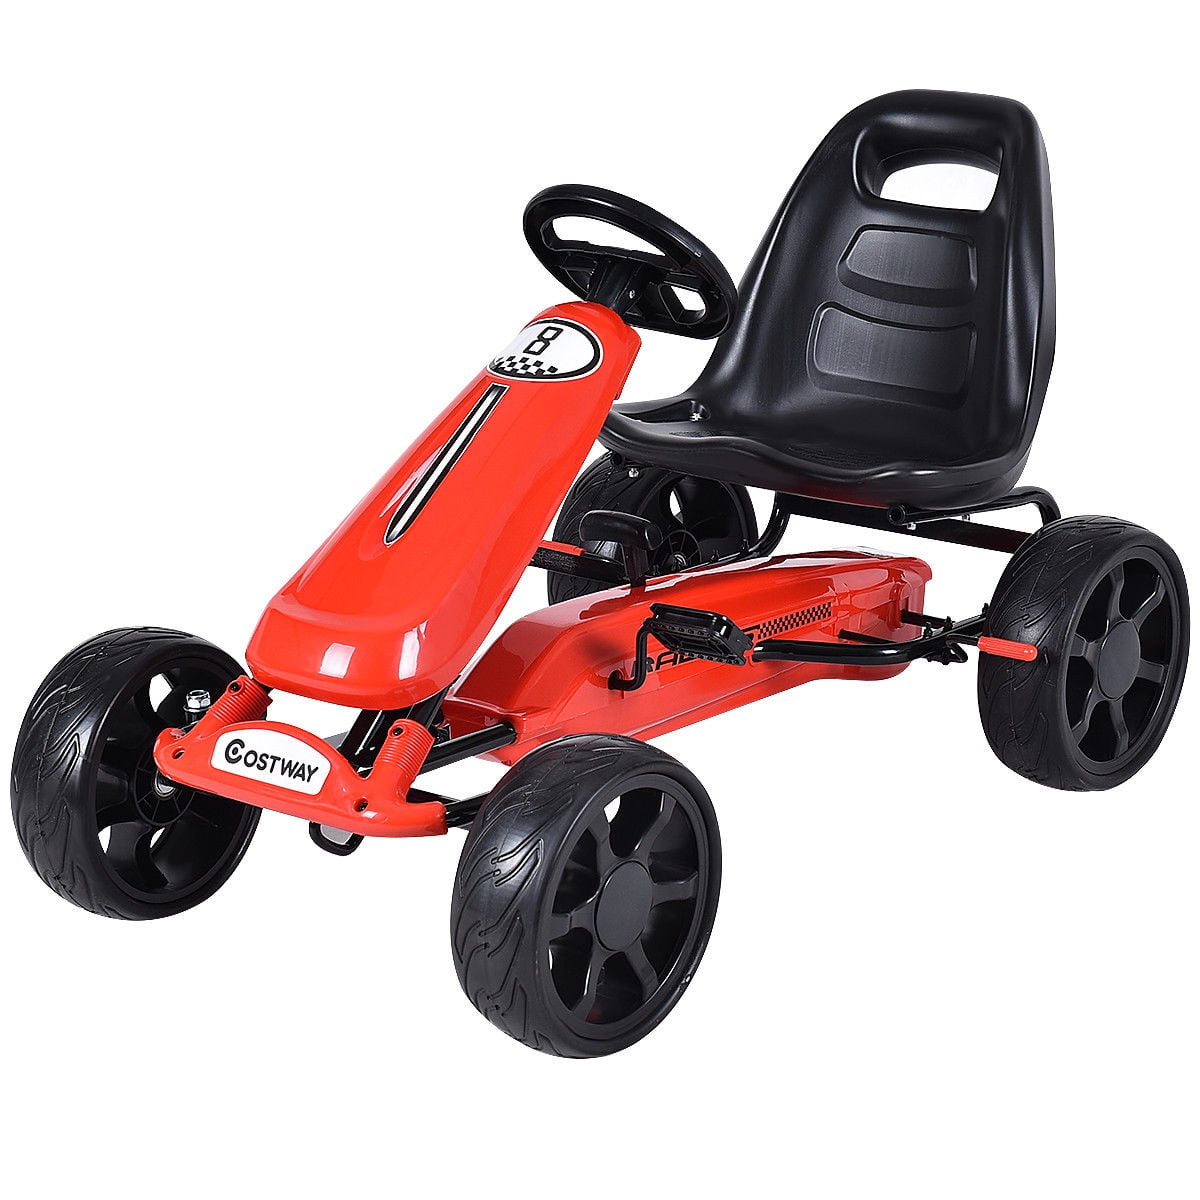 Costzon Go Kart 4 Wheel Powered Ride On Toy EVA Rubber Tires Outdoor Racer Pedal Car with Clutch Adjustable Seat Black Brake 